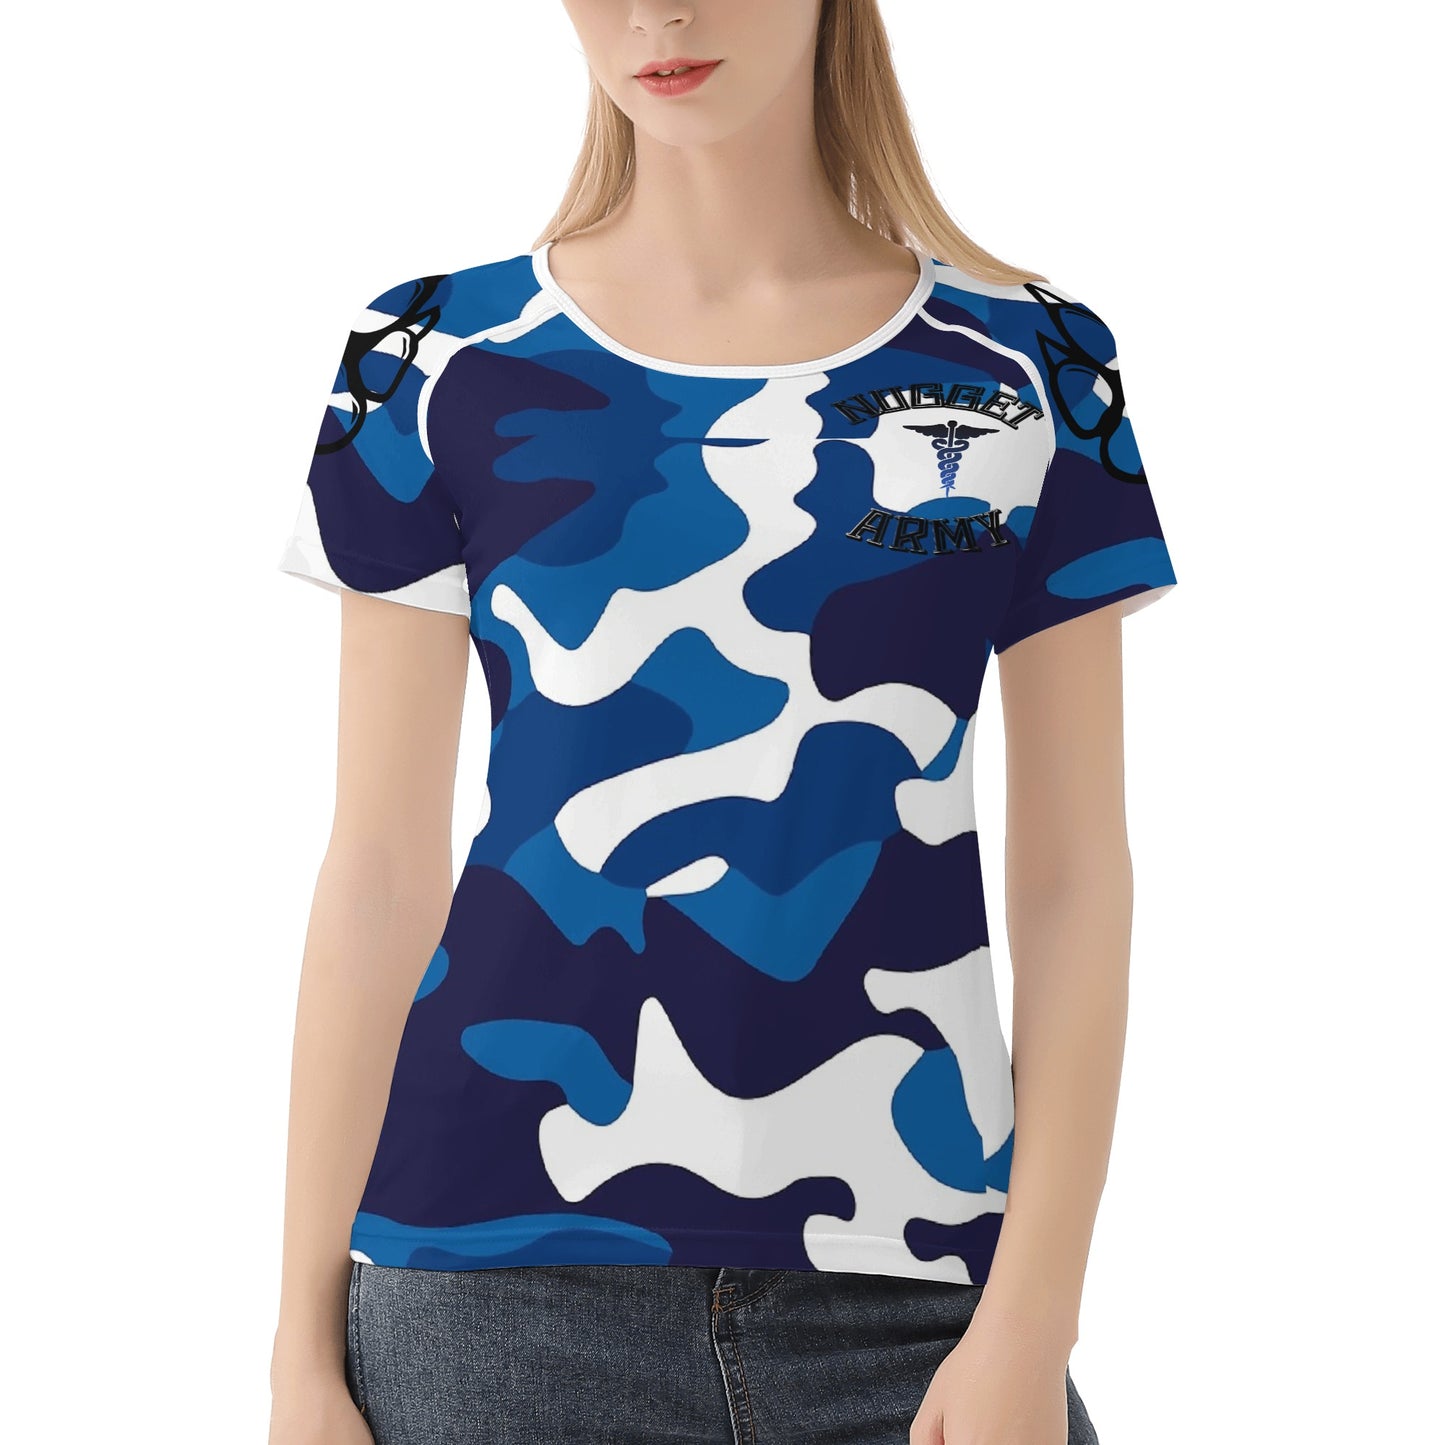 Stand out  with the  Nugget Army Medic Womens T shirt  available at Hey Nugget. Grab yours today!